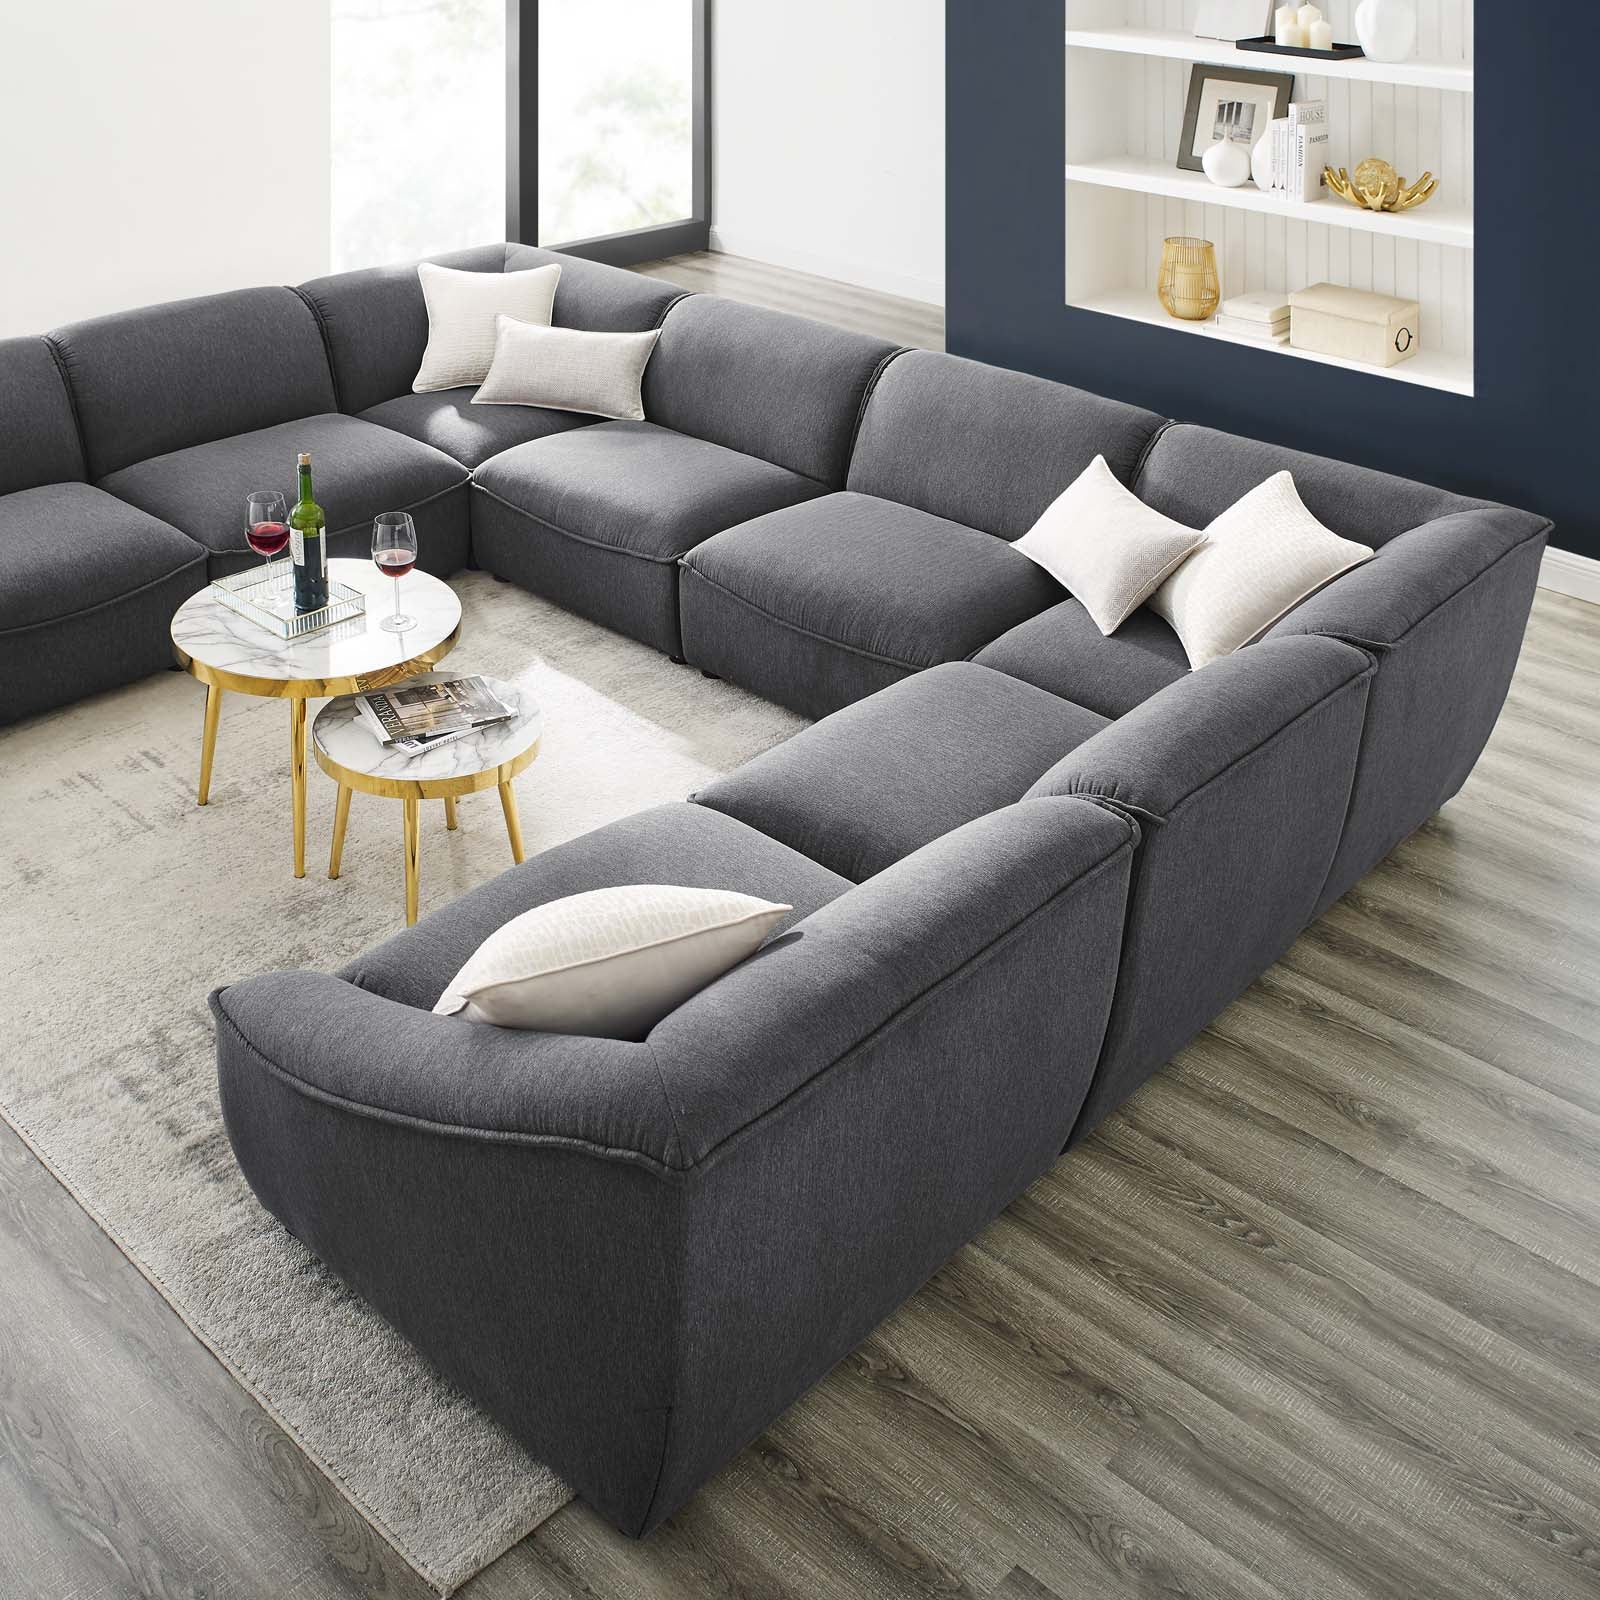 Comprise 8-Piece Sectional Sofa-Sectional-Modway-Wall2Wall Furnishings